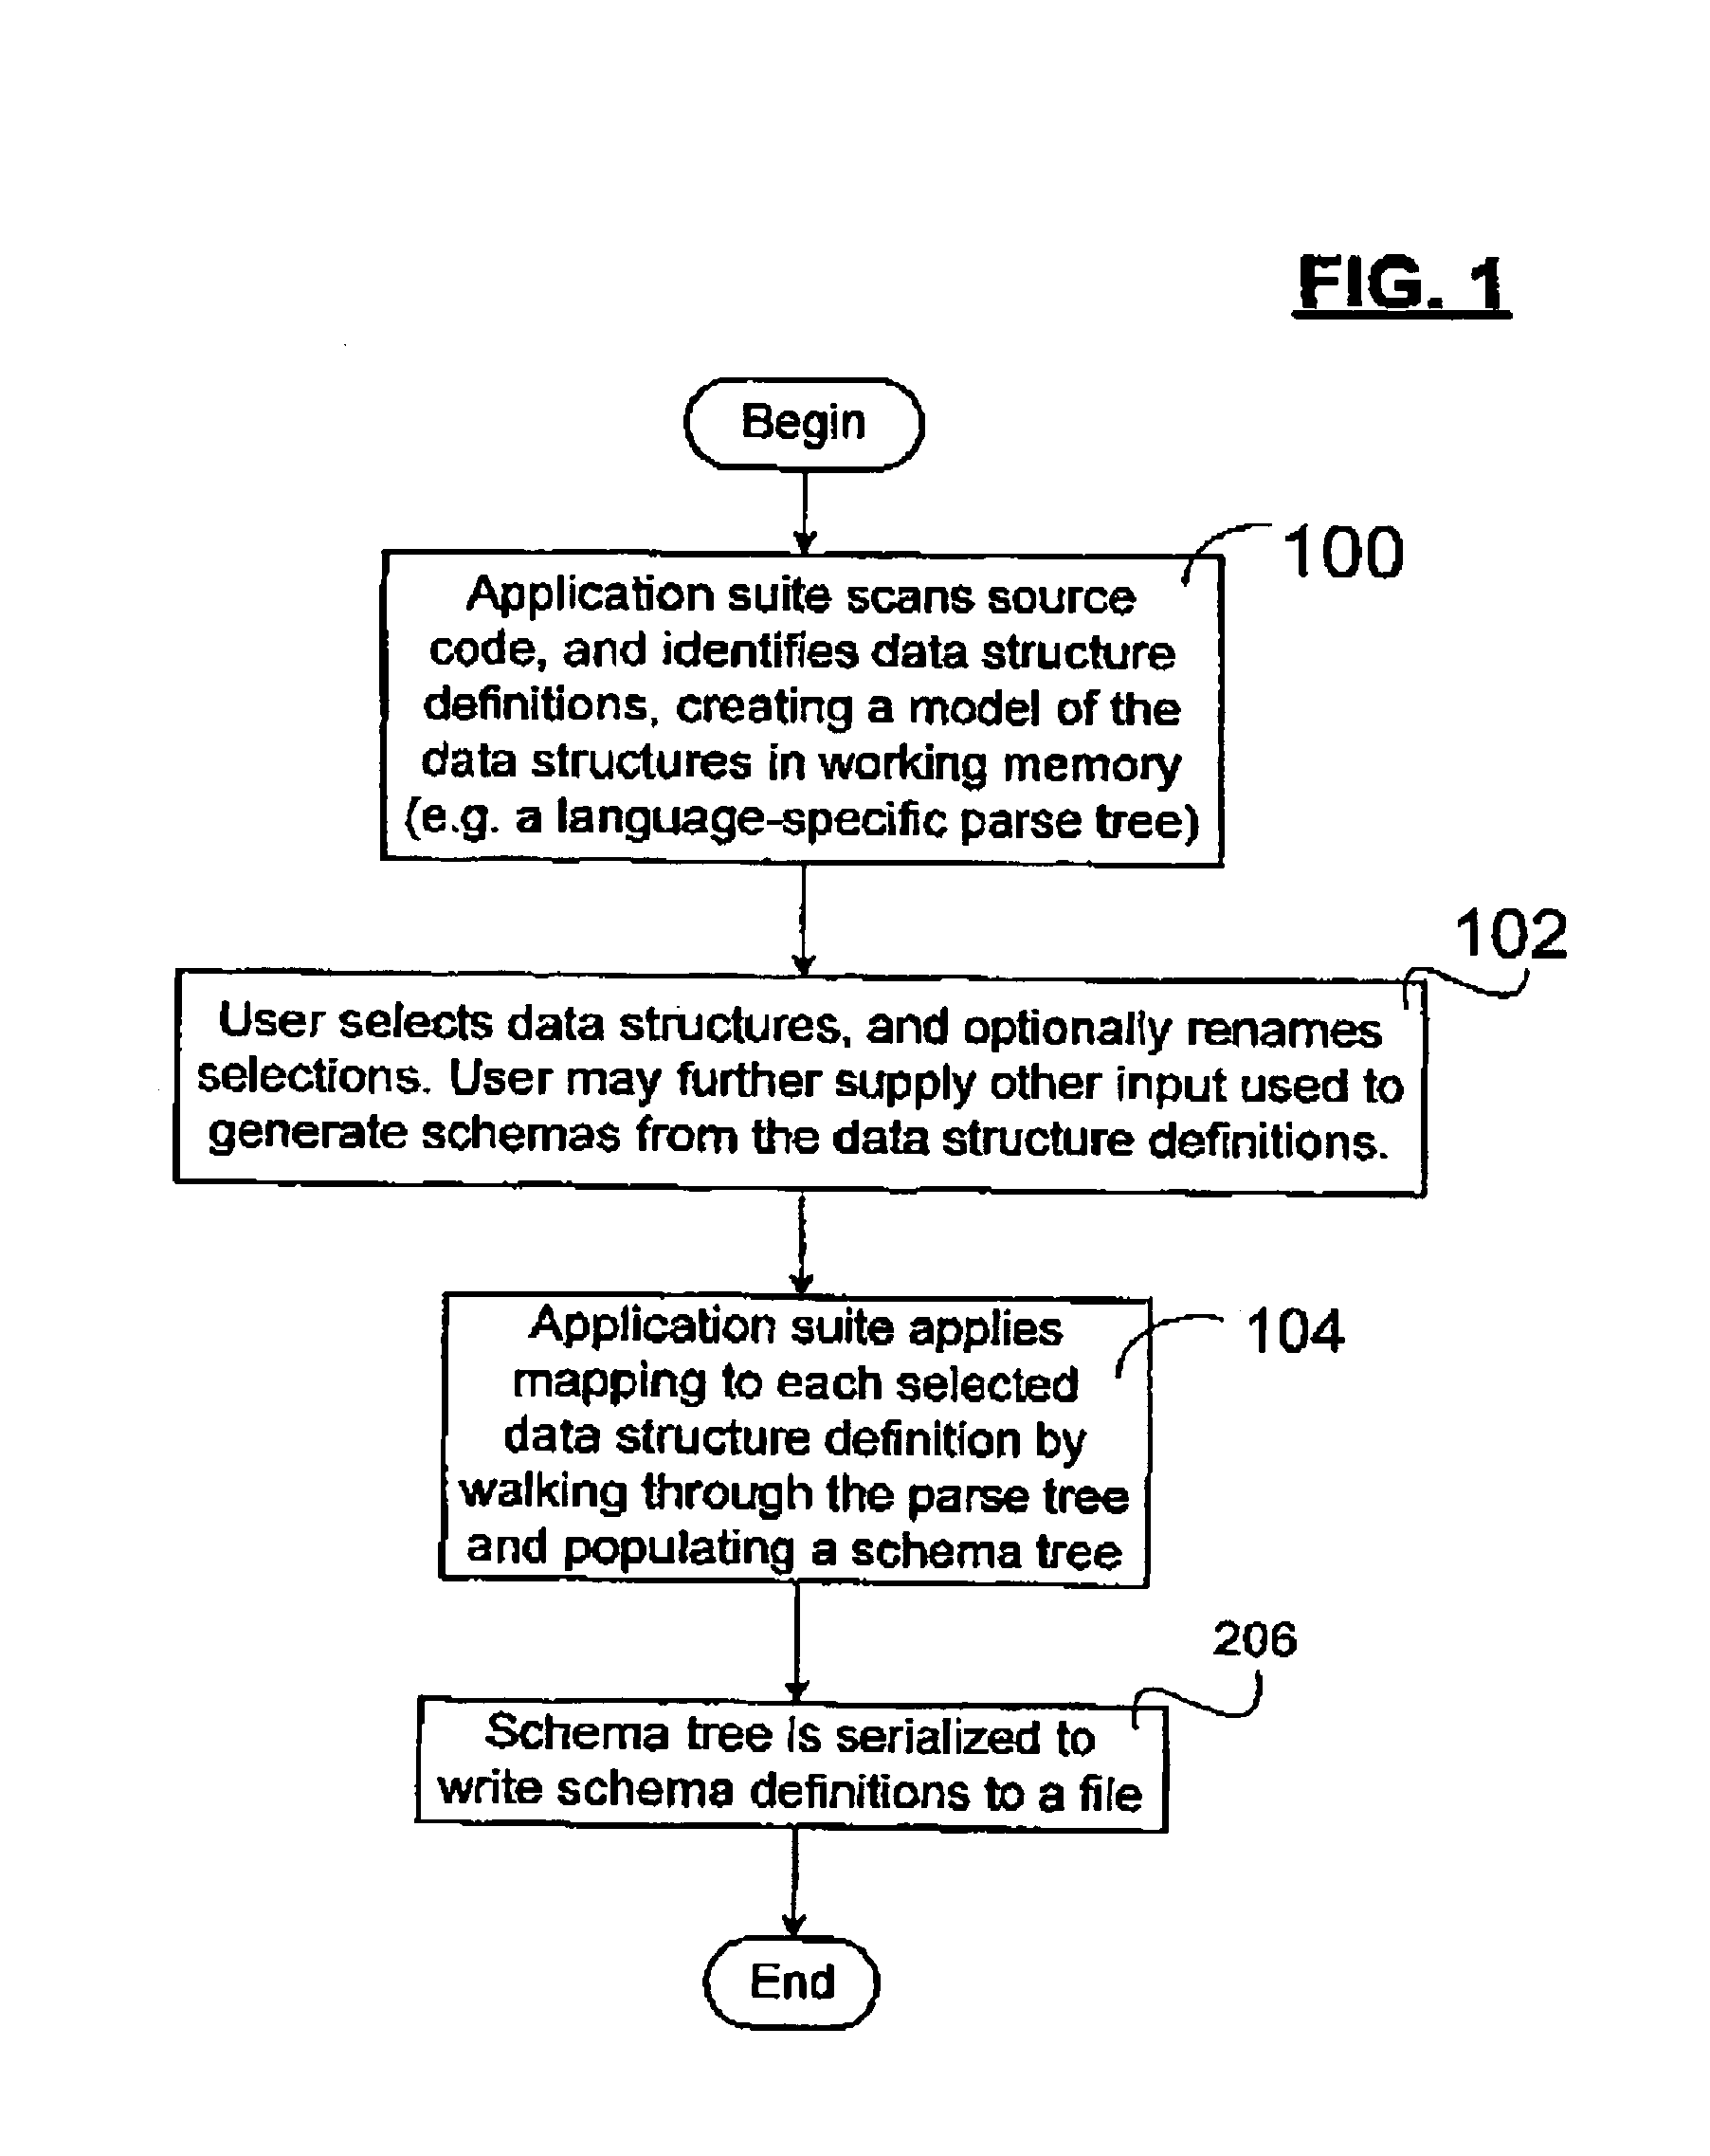 Method and apparatus for converting legacy programming language data structures to schema definitions